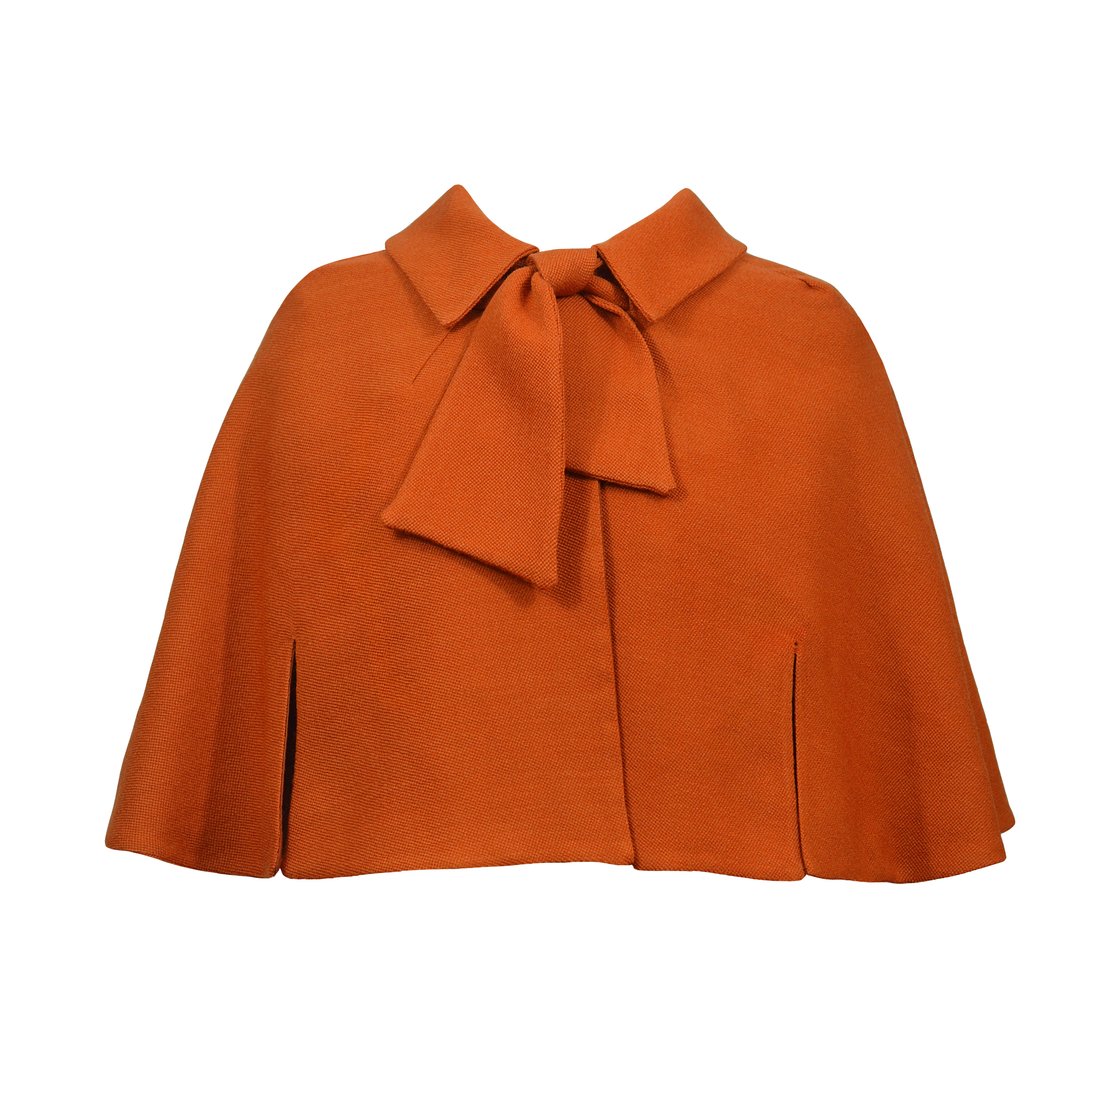 Image of 'Little Red Riding Hood' Cape in Burnt Orange